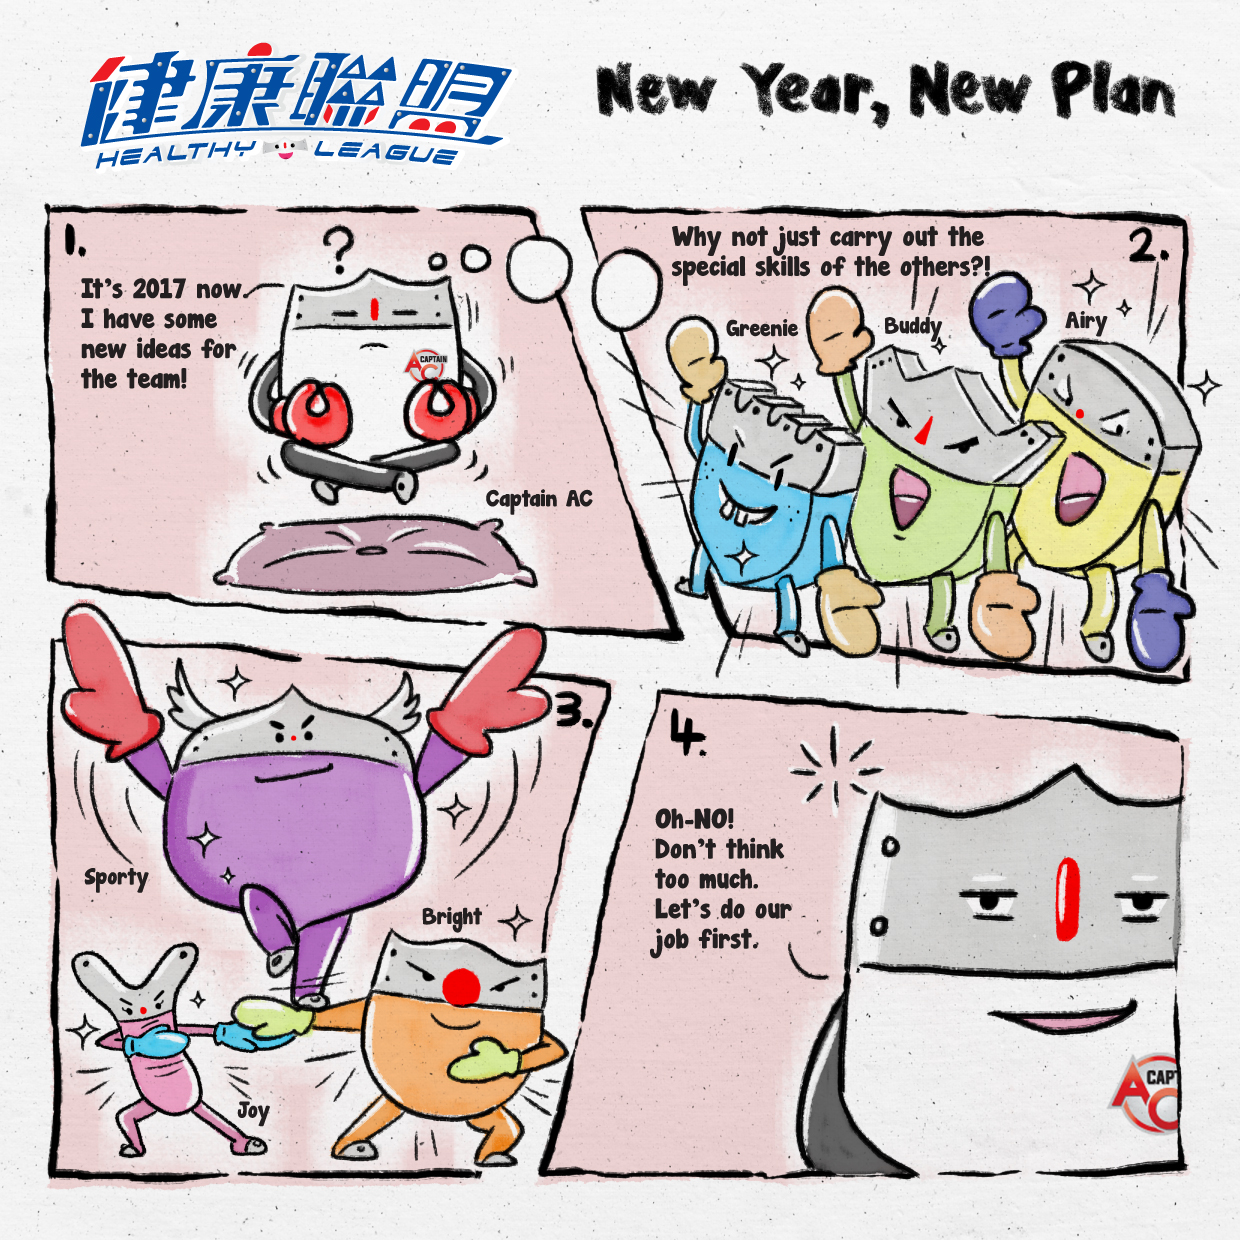 NEW YEAR, NEW PLAN